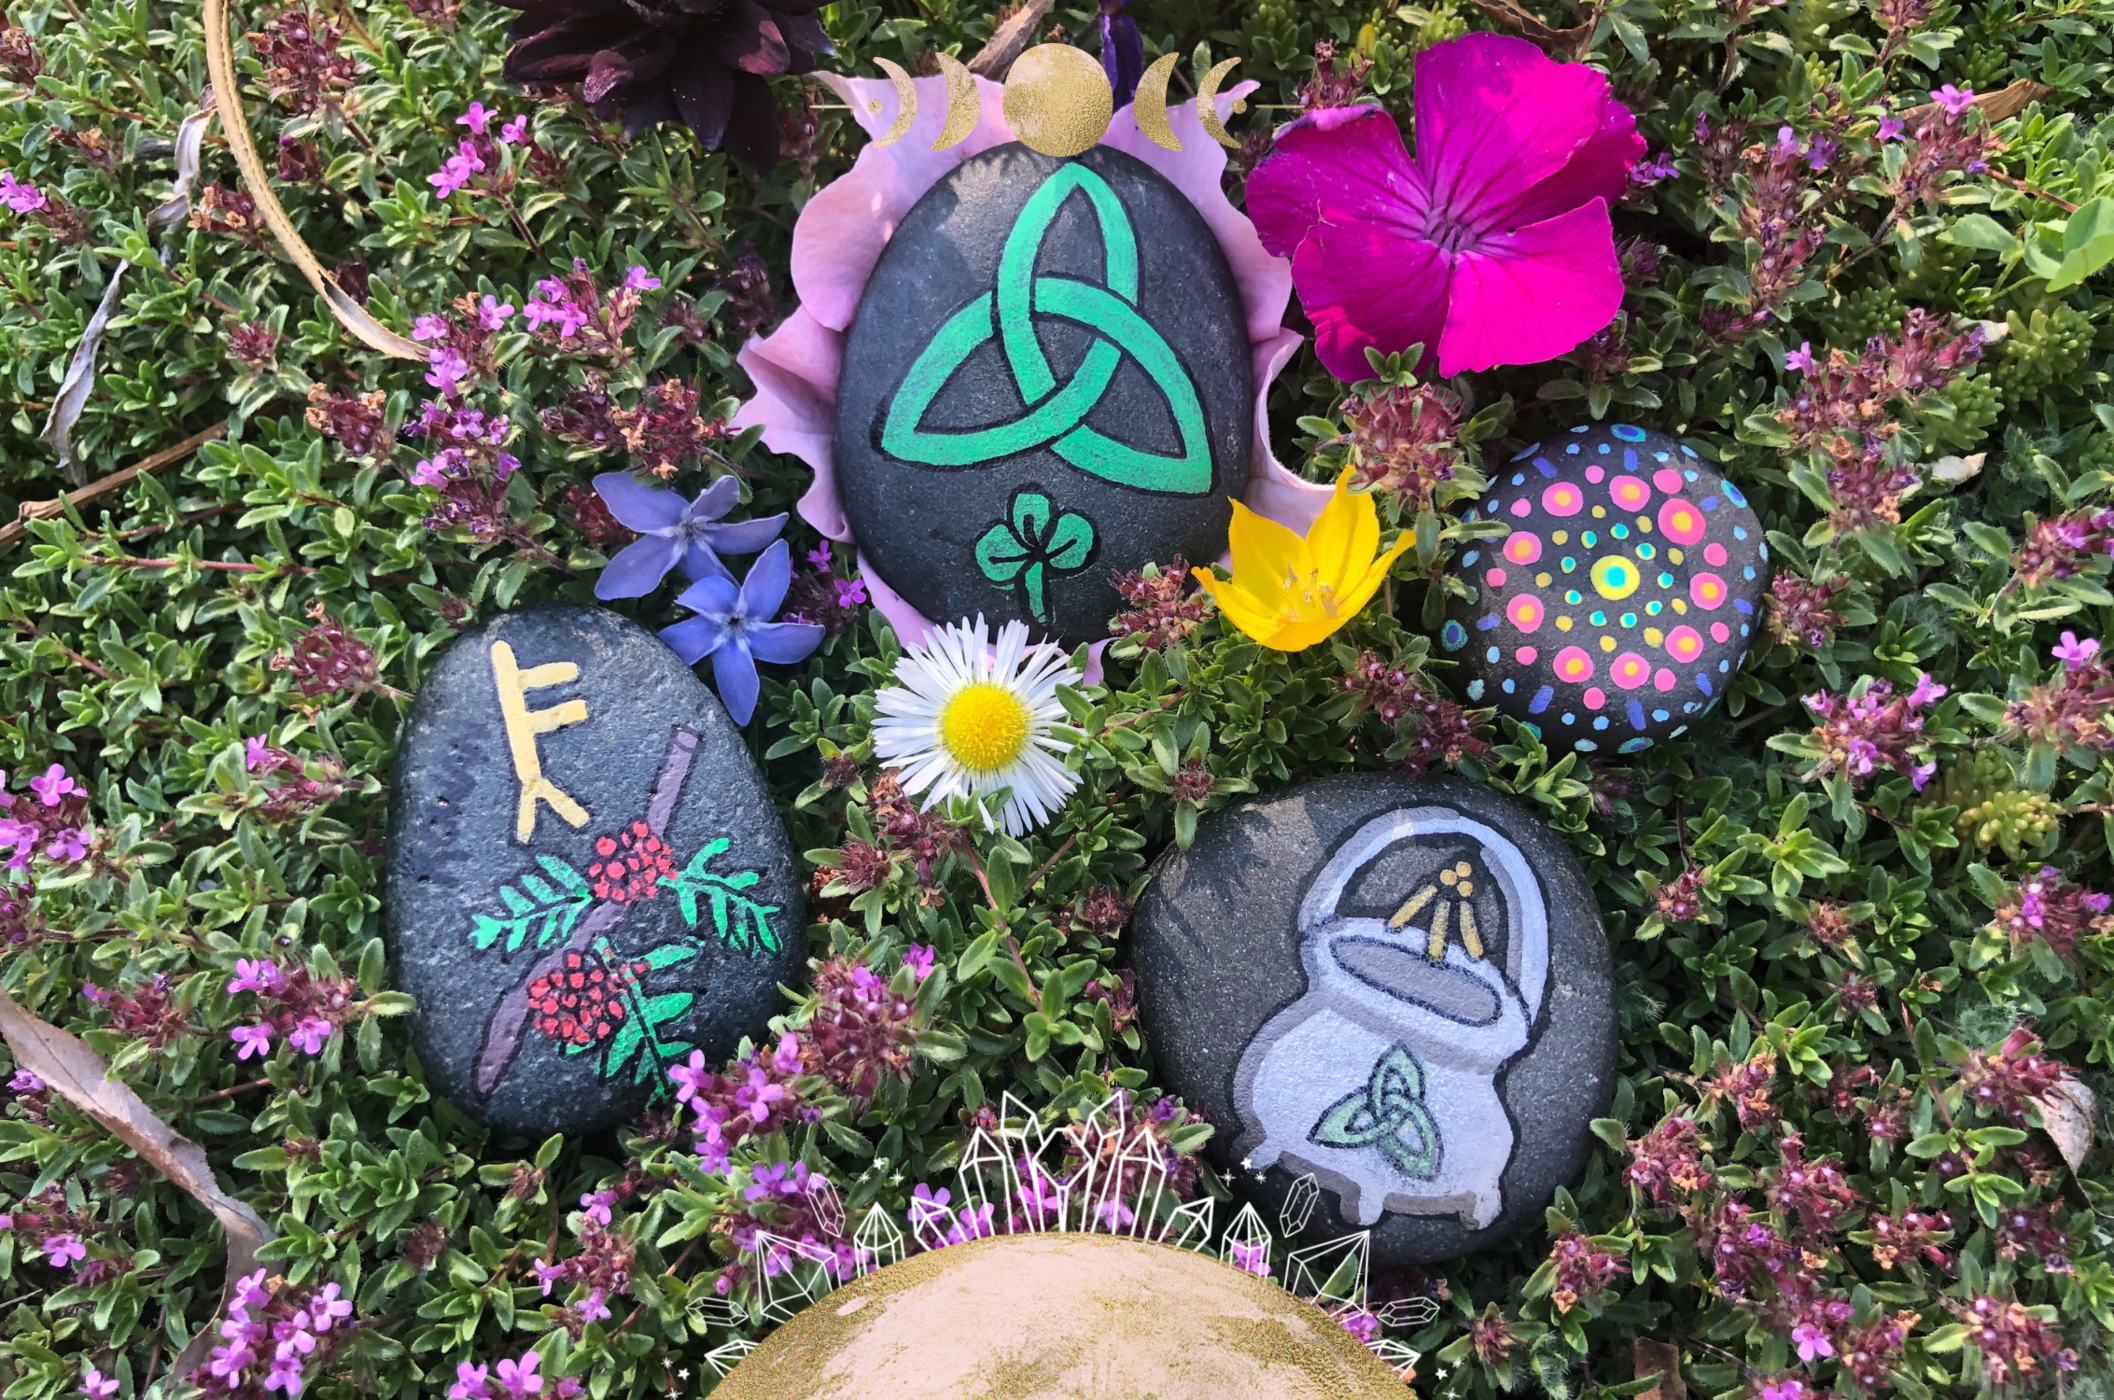 Image of painted stones surrounded by colorful flowers